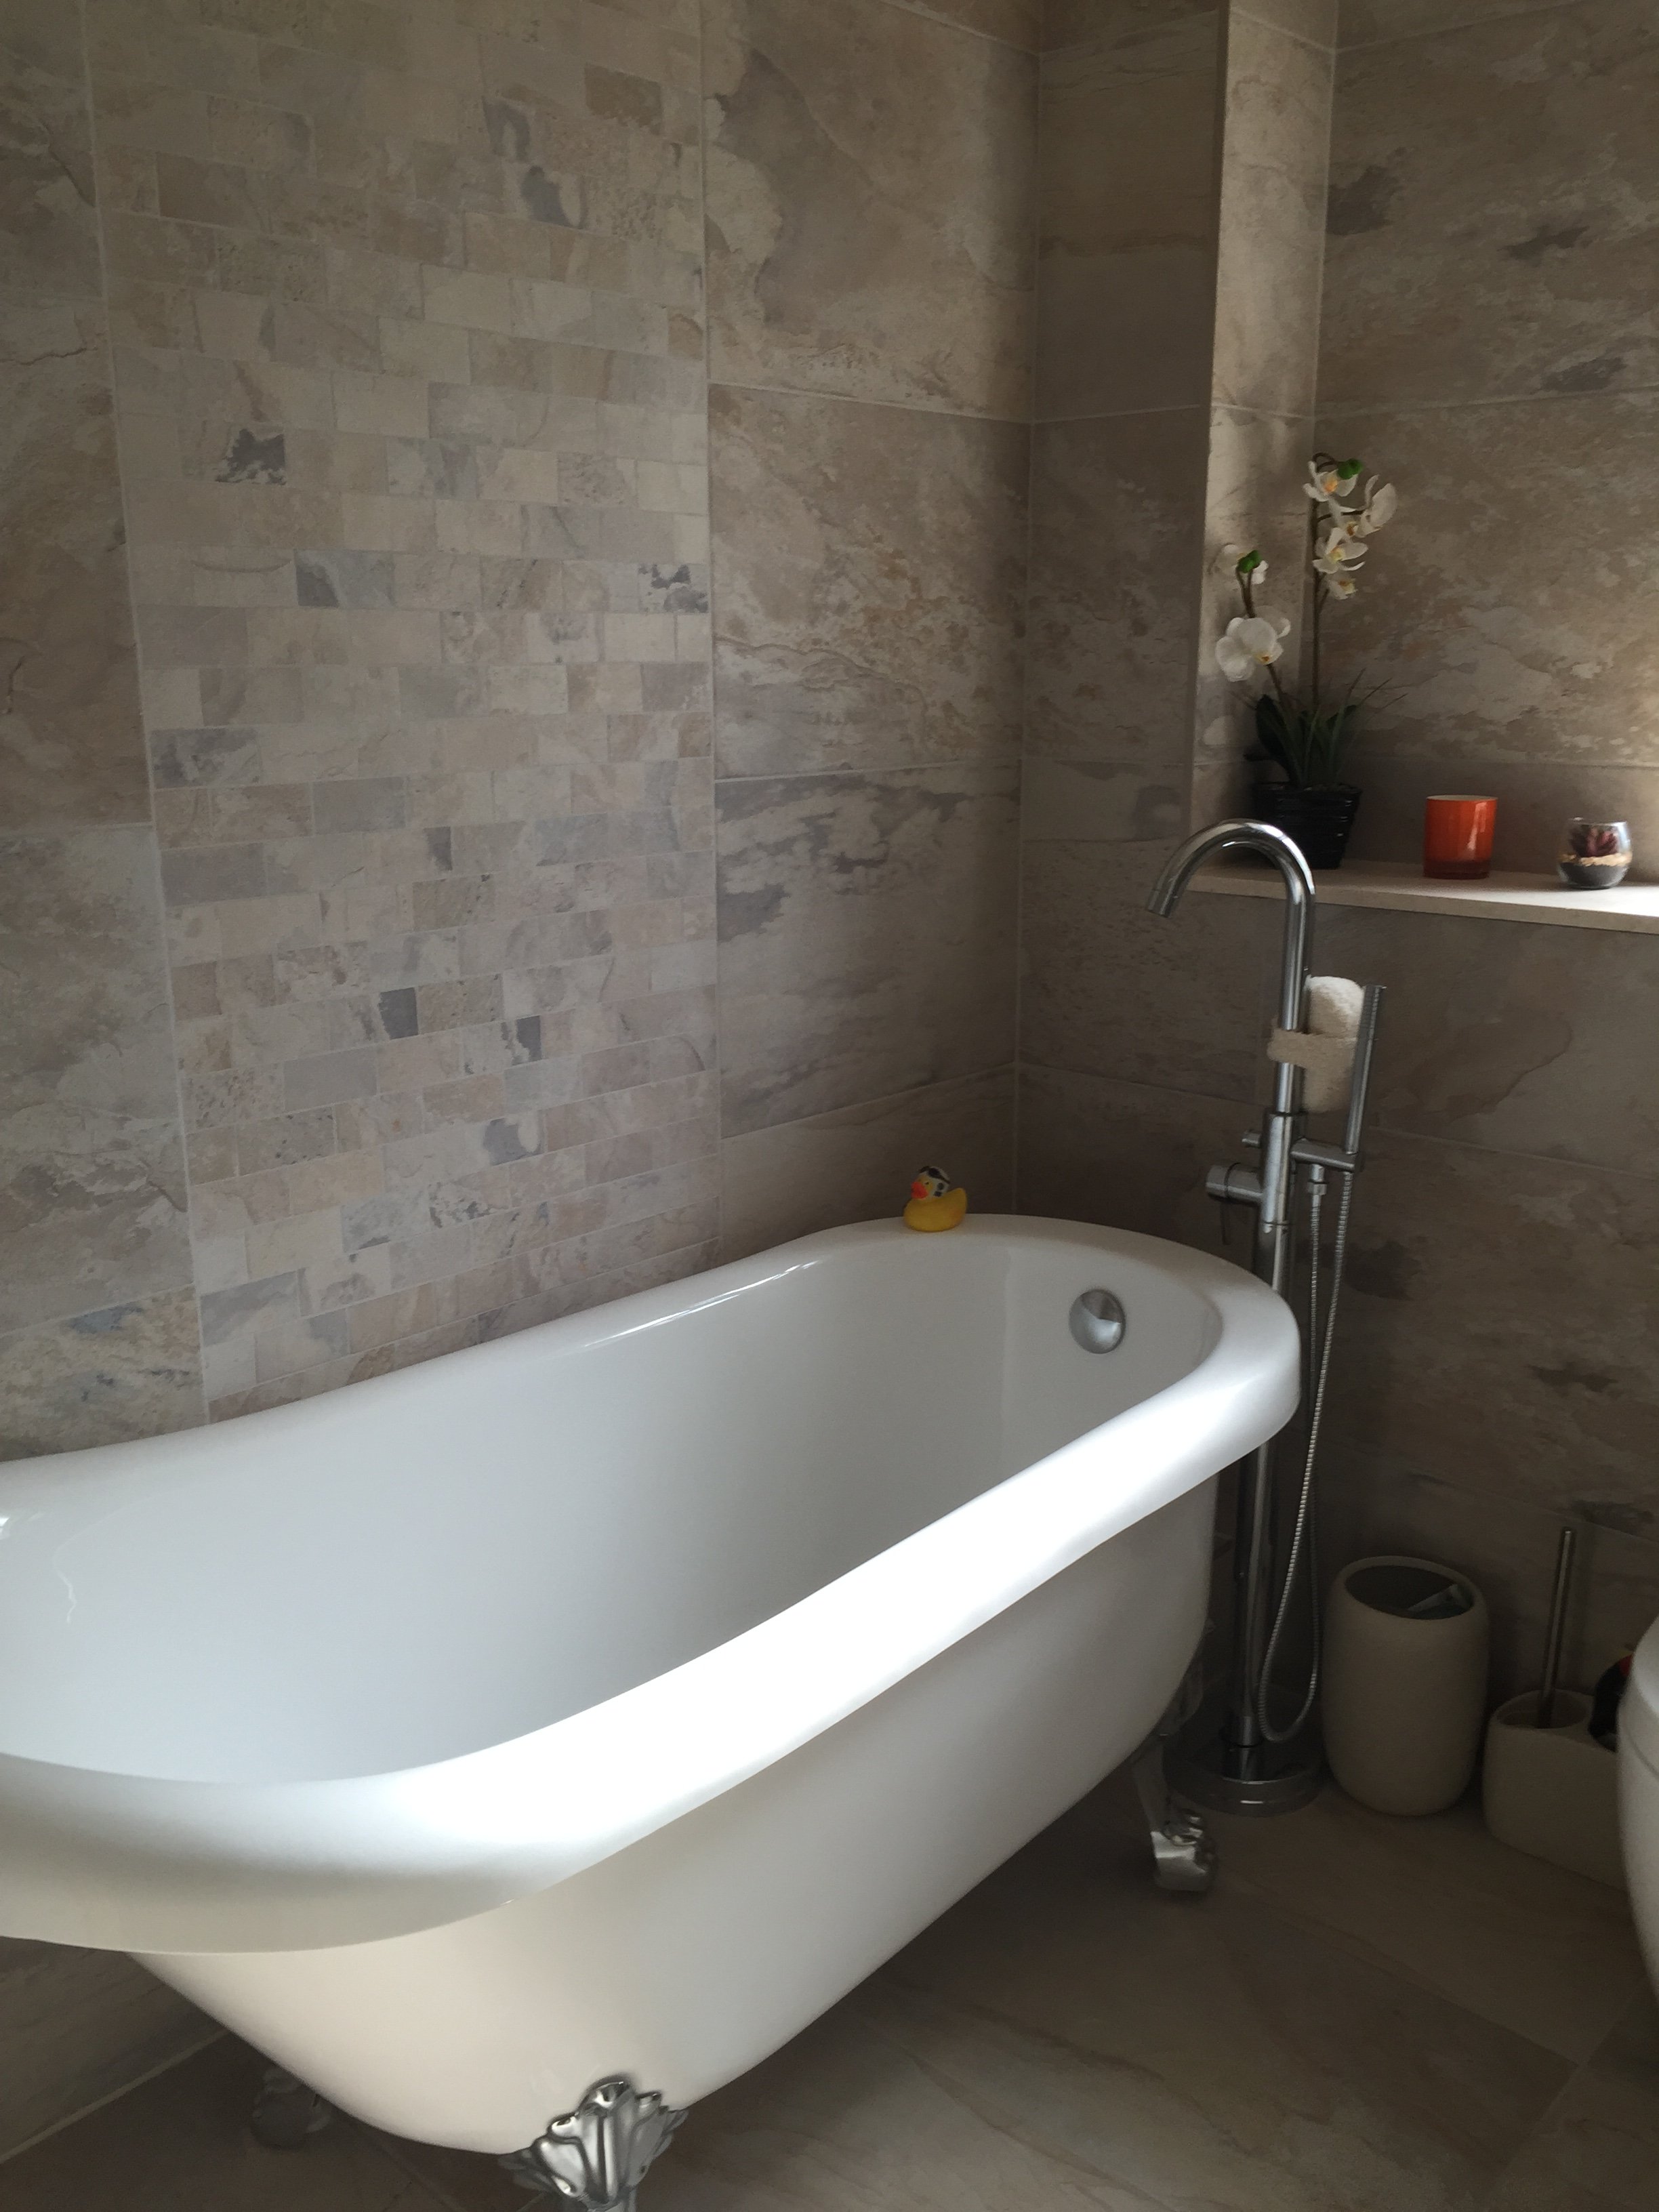 Winter Slate Mosaic Panel in middle of the bath